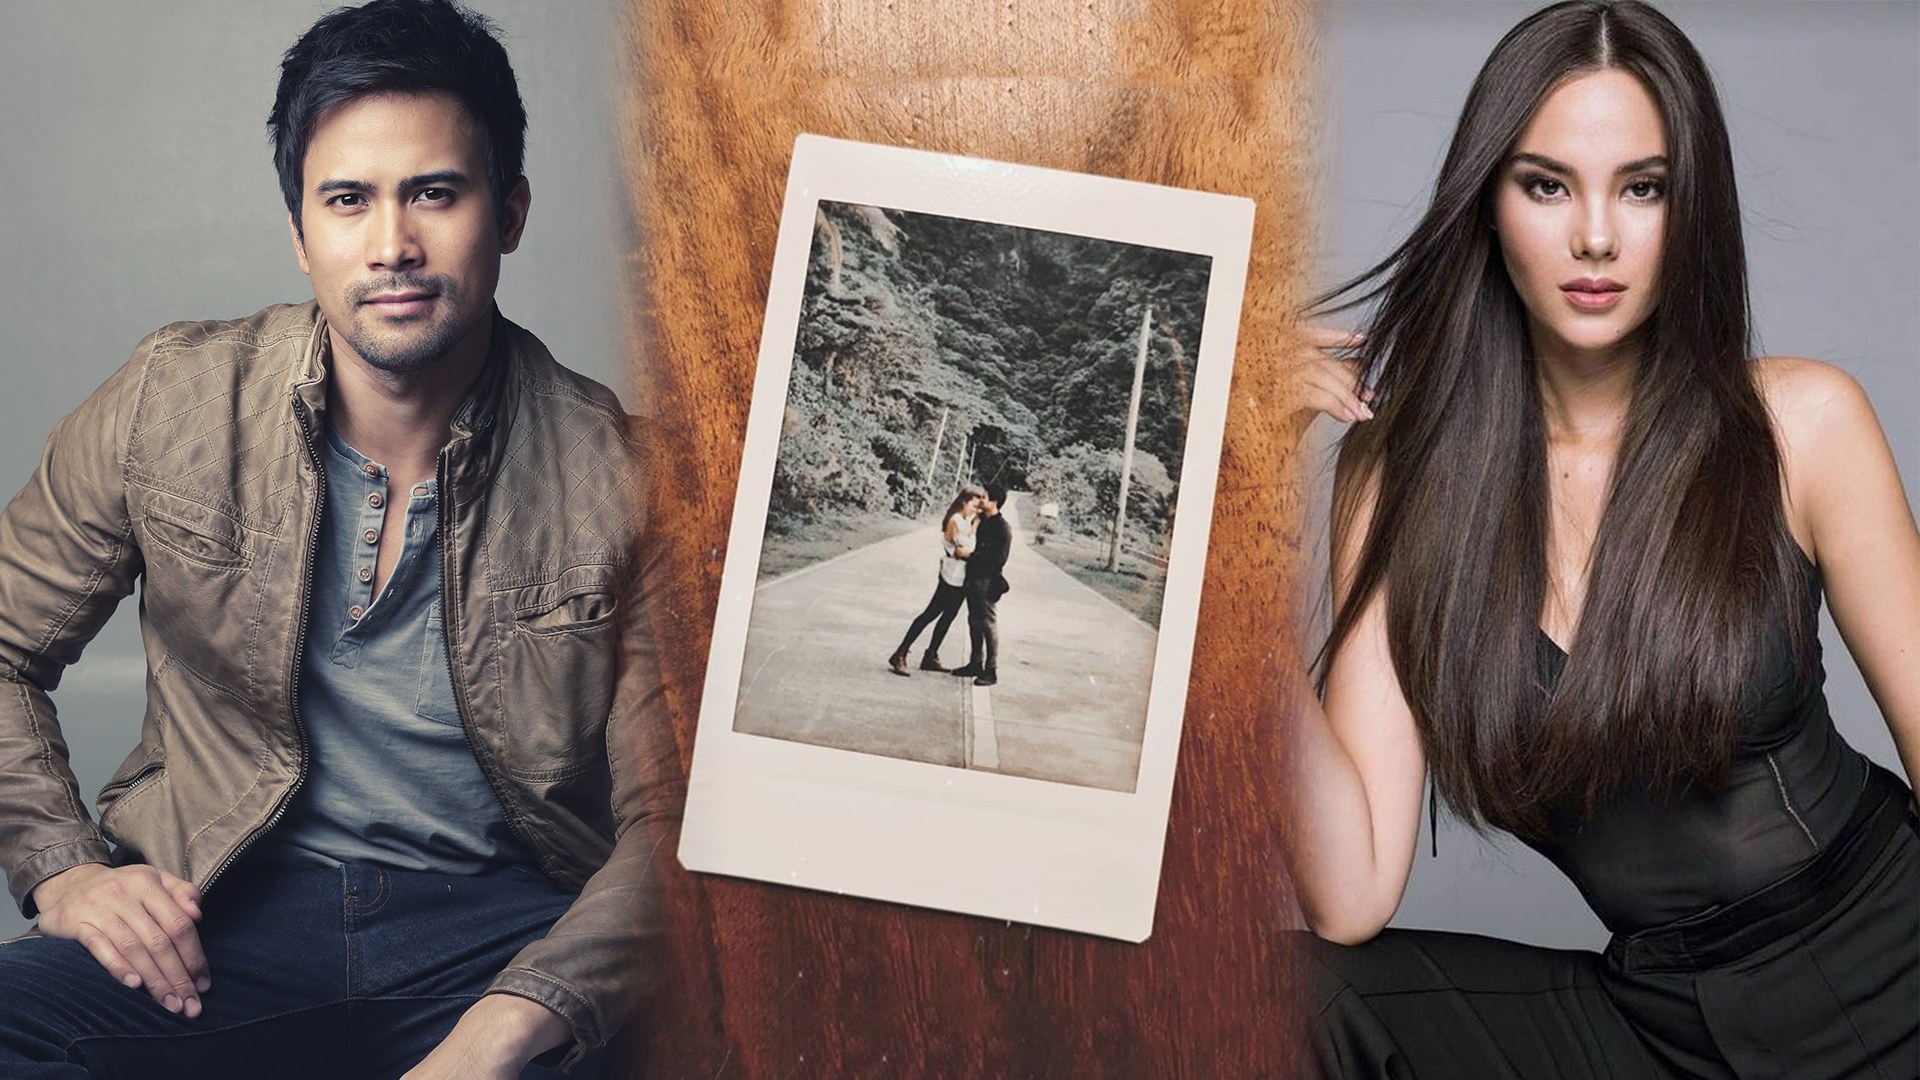 Sam milby and catriona gray wedding date